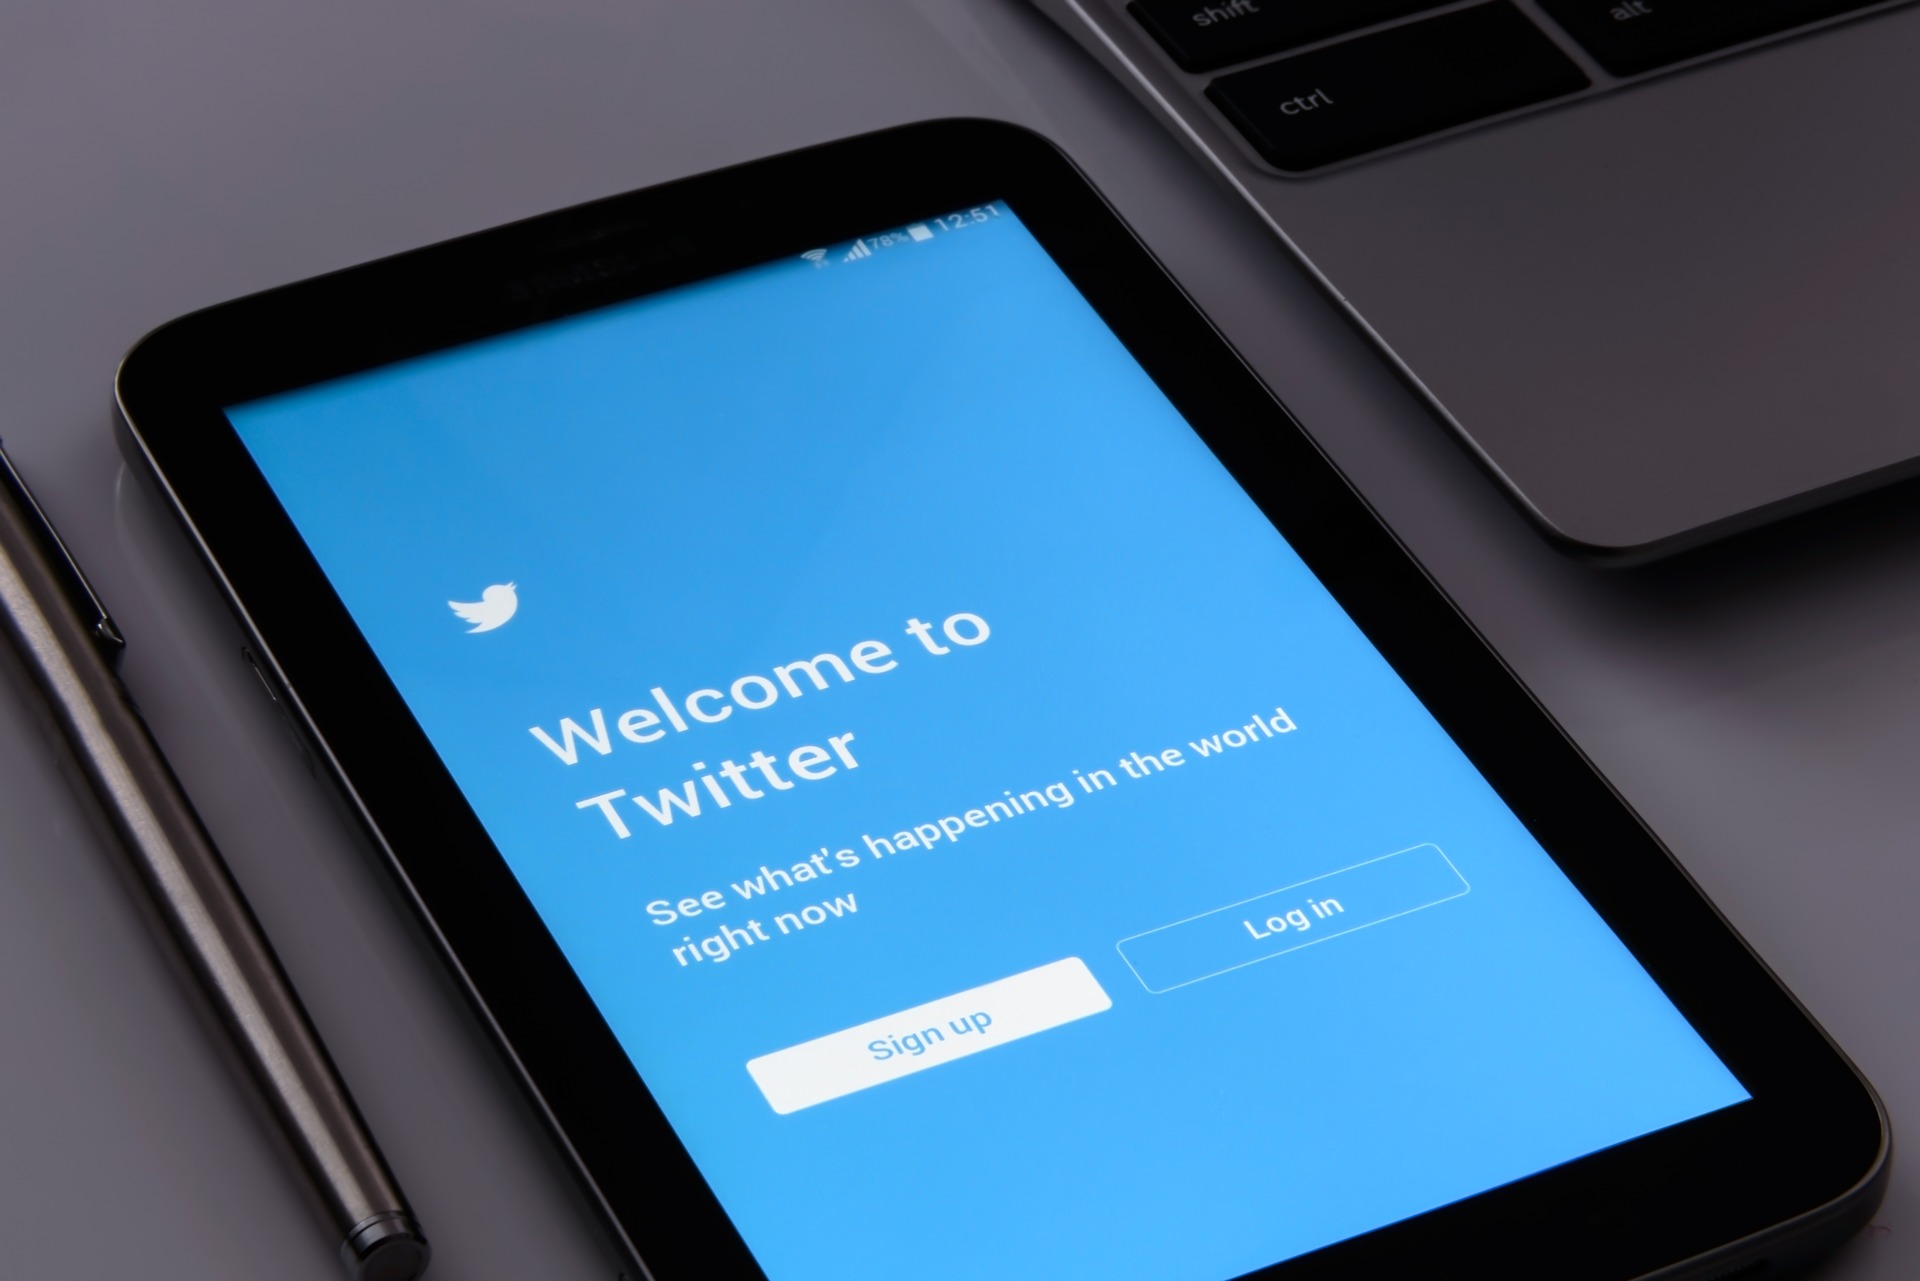 Twitter Welcome screen on a smartphone, in the center of a pen and laptop. With the Signup and Login button the screen